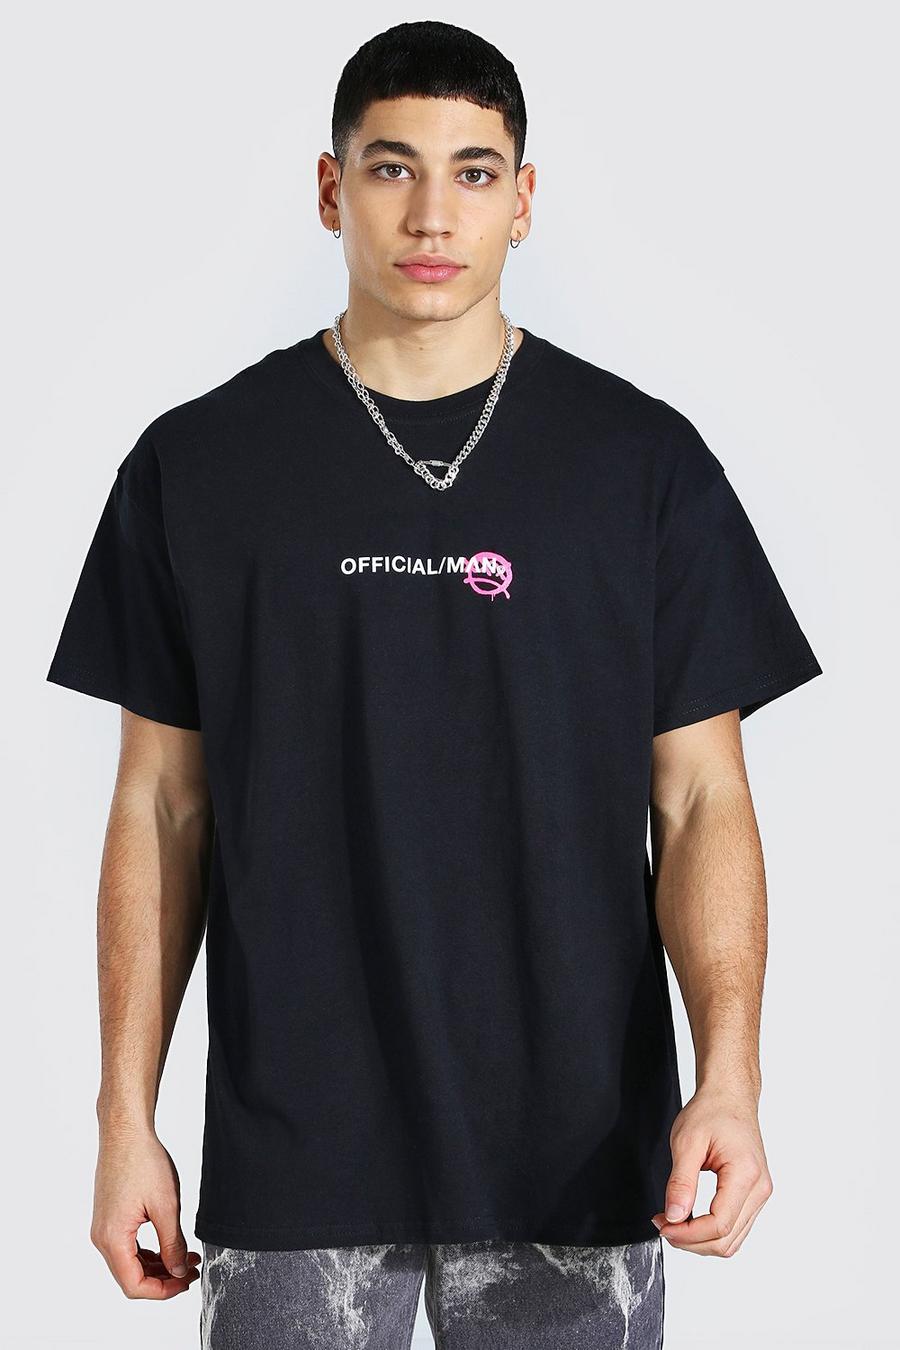 Black Oversized Official Man Graphic T-Shirt image number 1